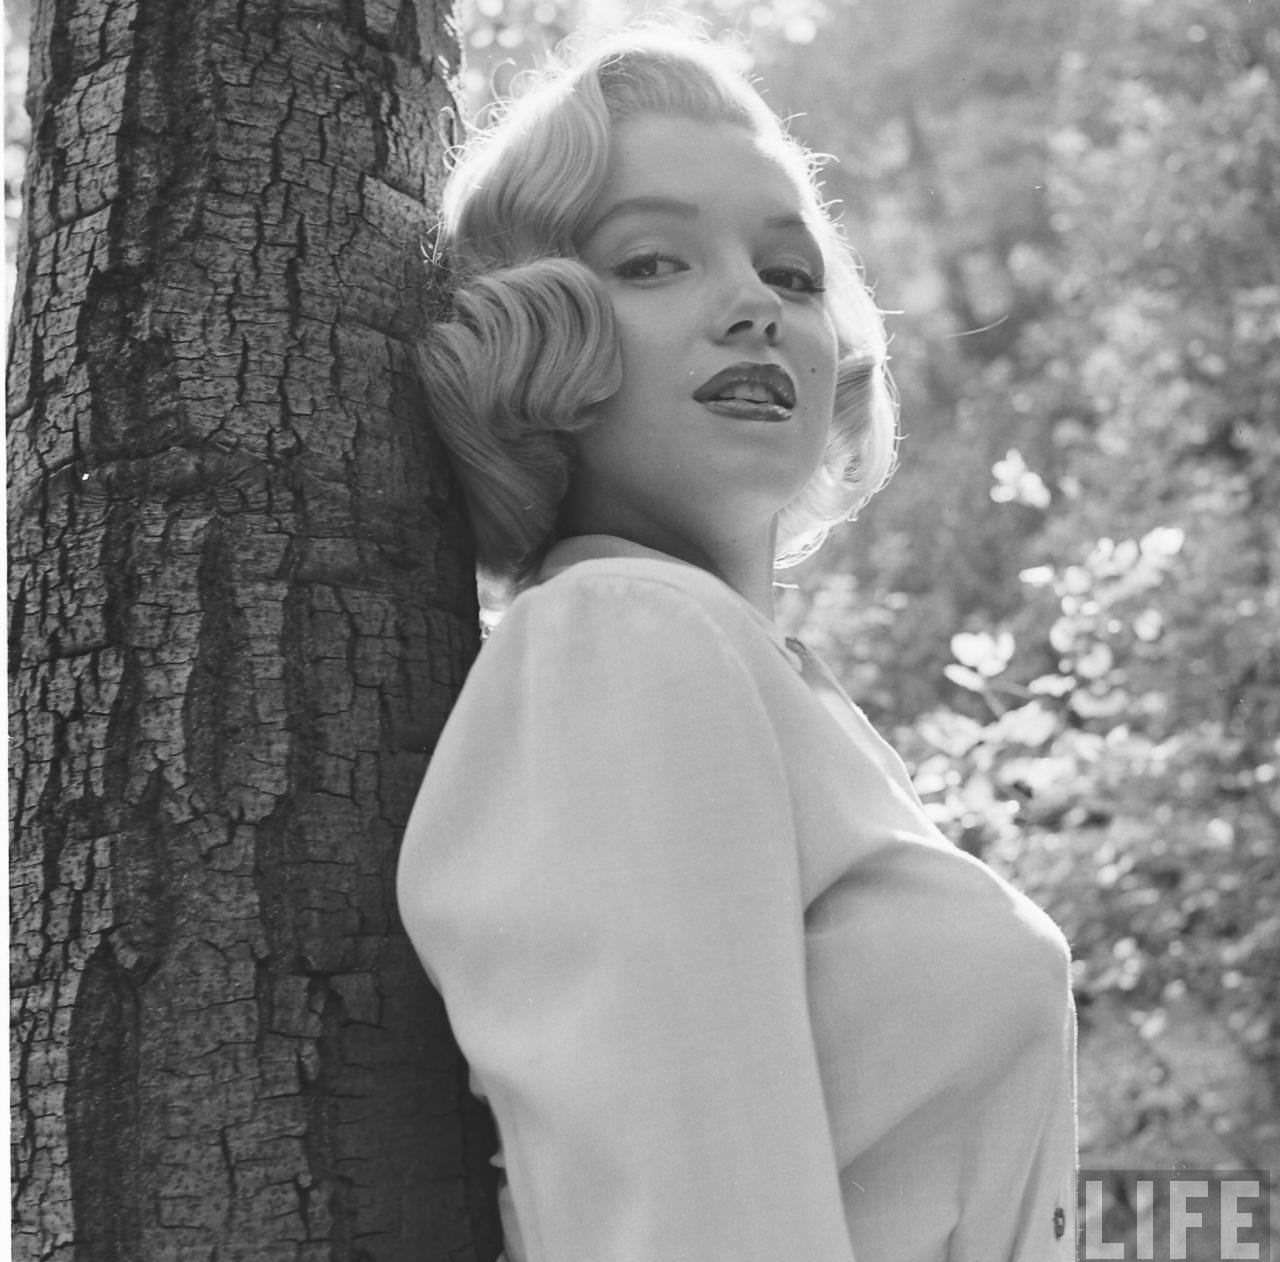 The Girl Next Door: Iconic Photographs of Marilyn Monroe Hiking in the Woods, 1950